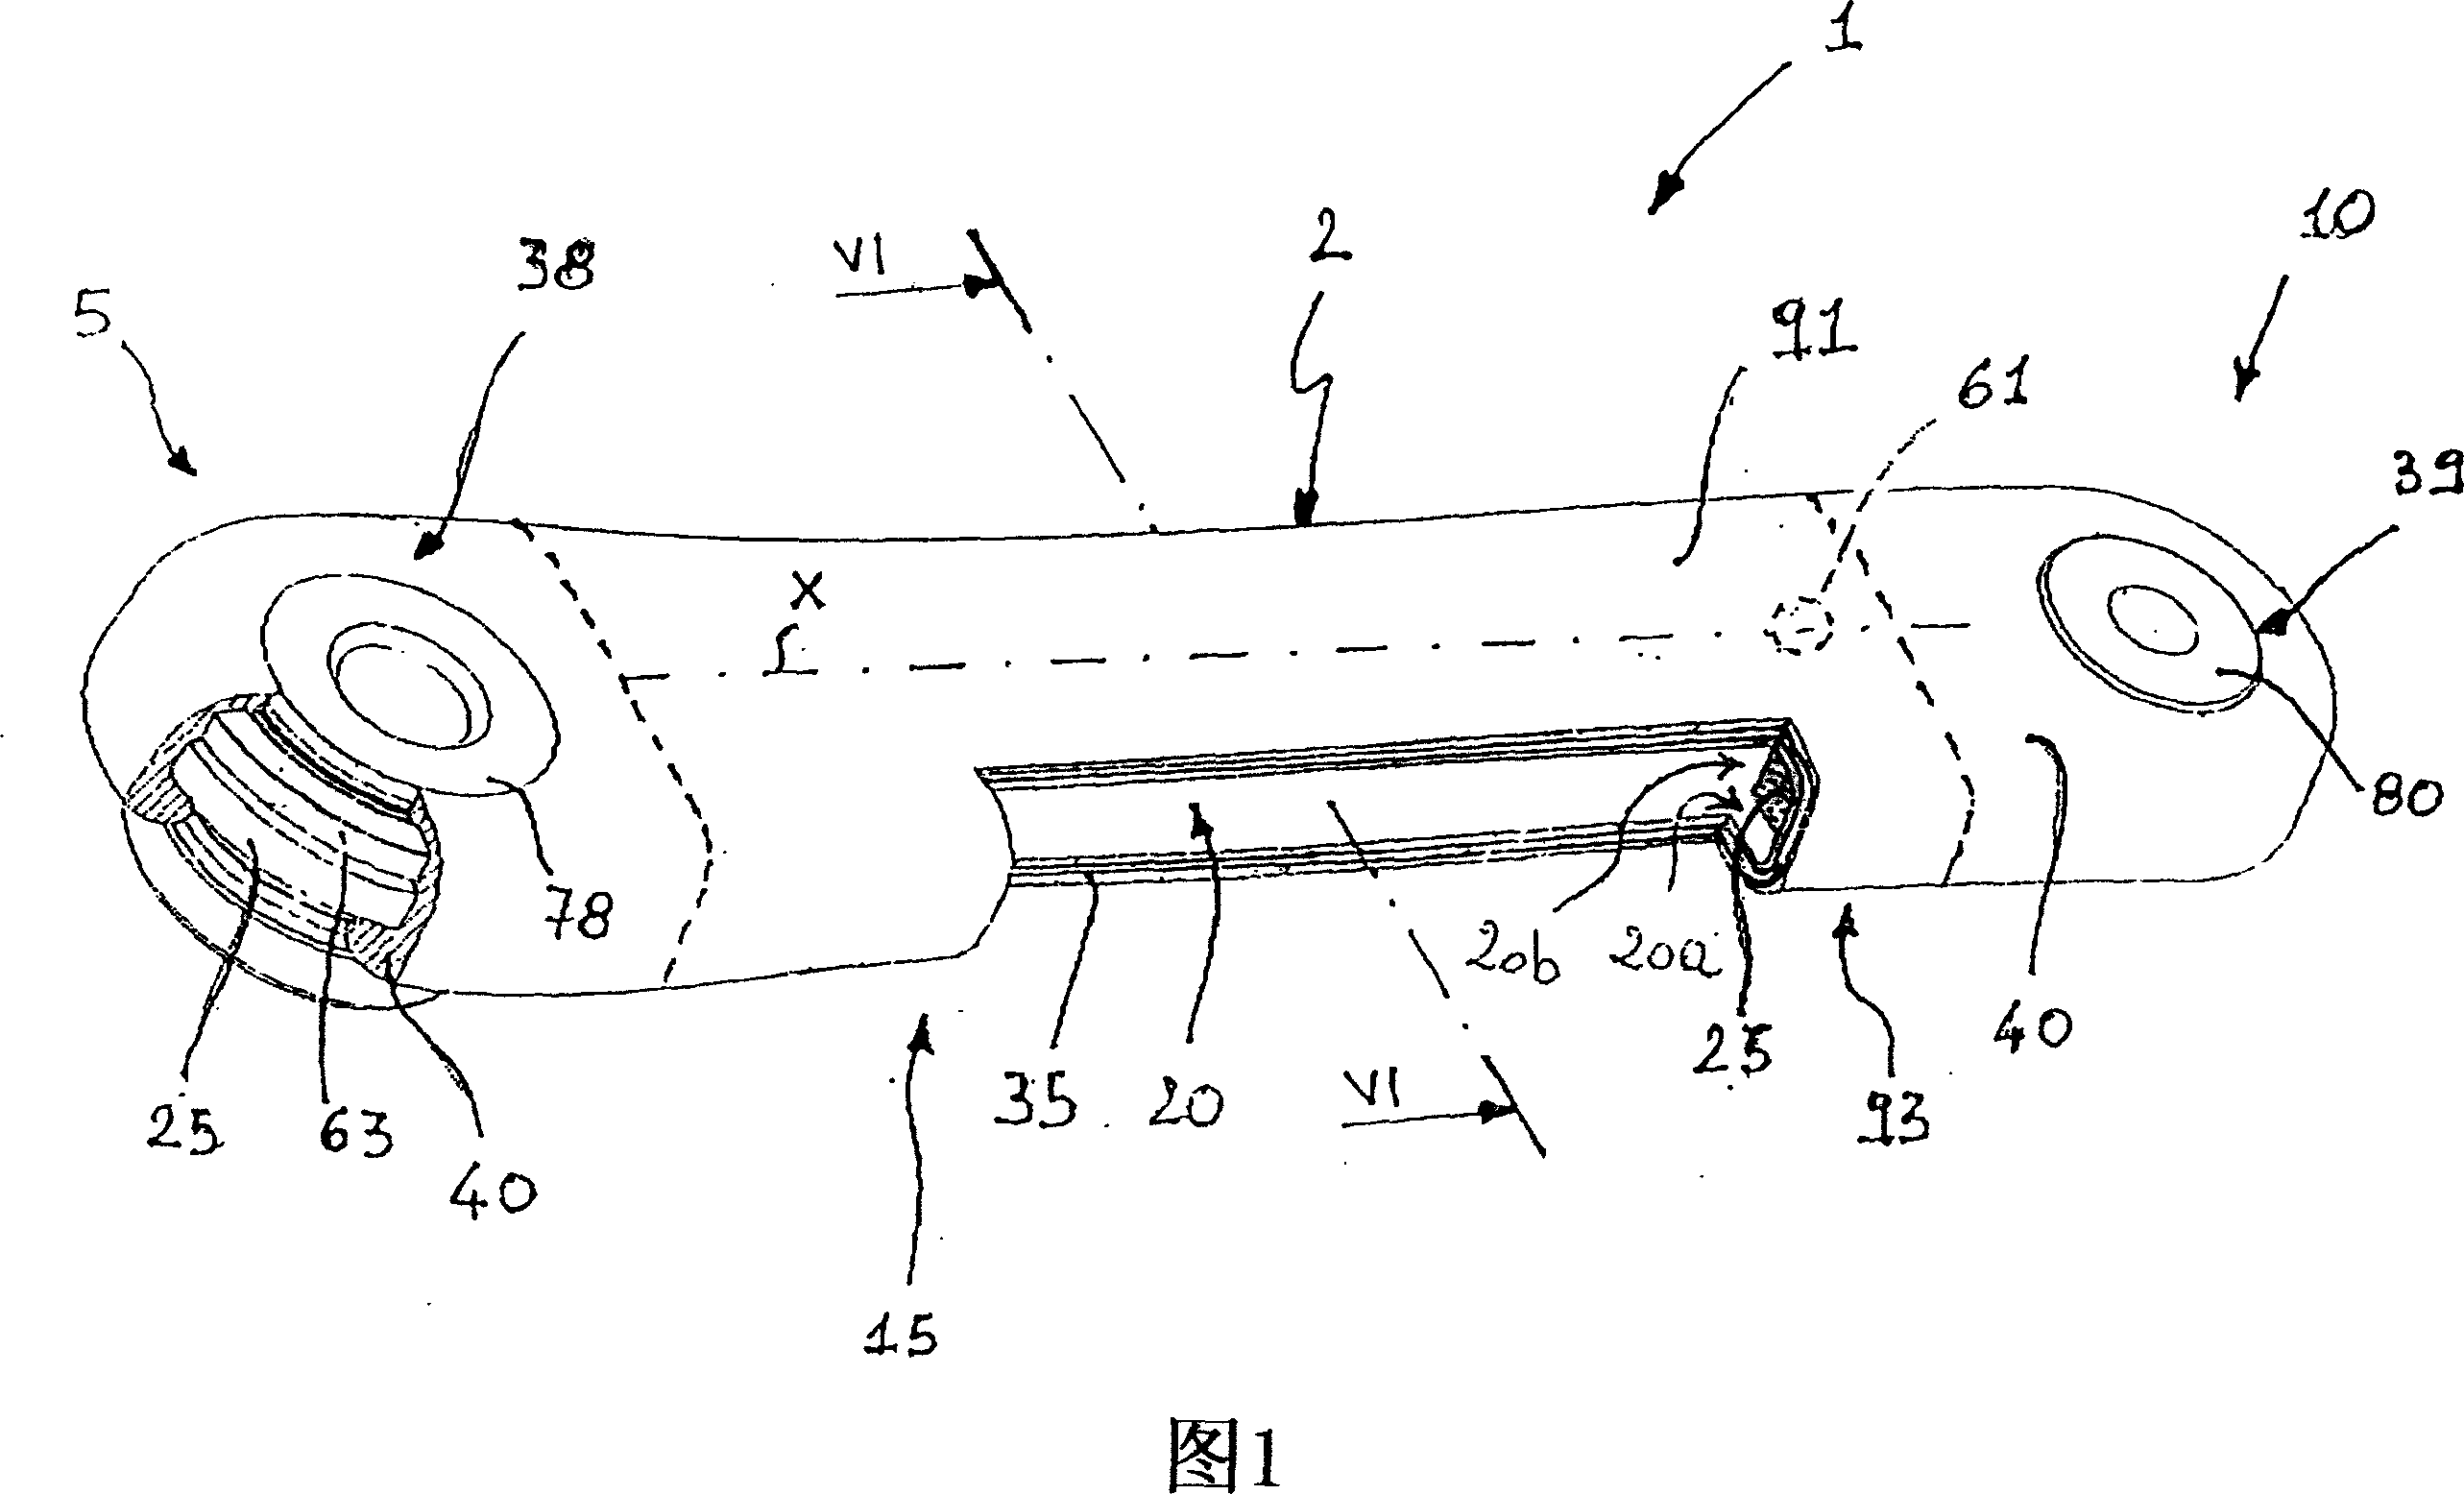 Bicycle pedal crank, intermediate product and method for manufactoring such a pedal crank